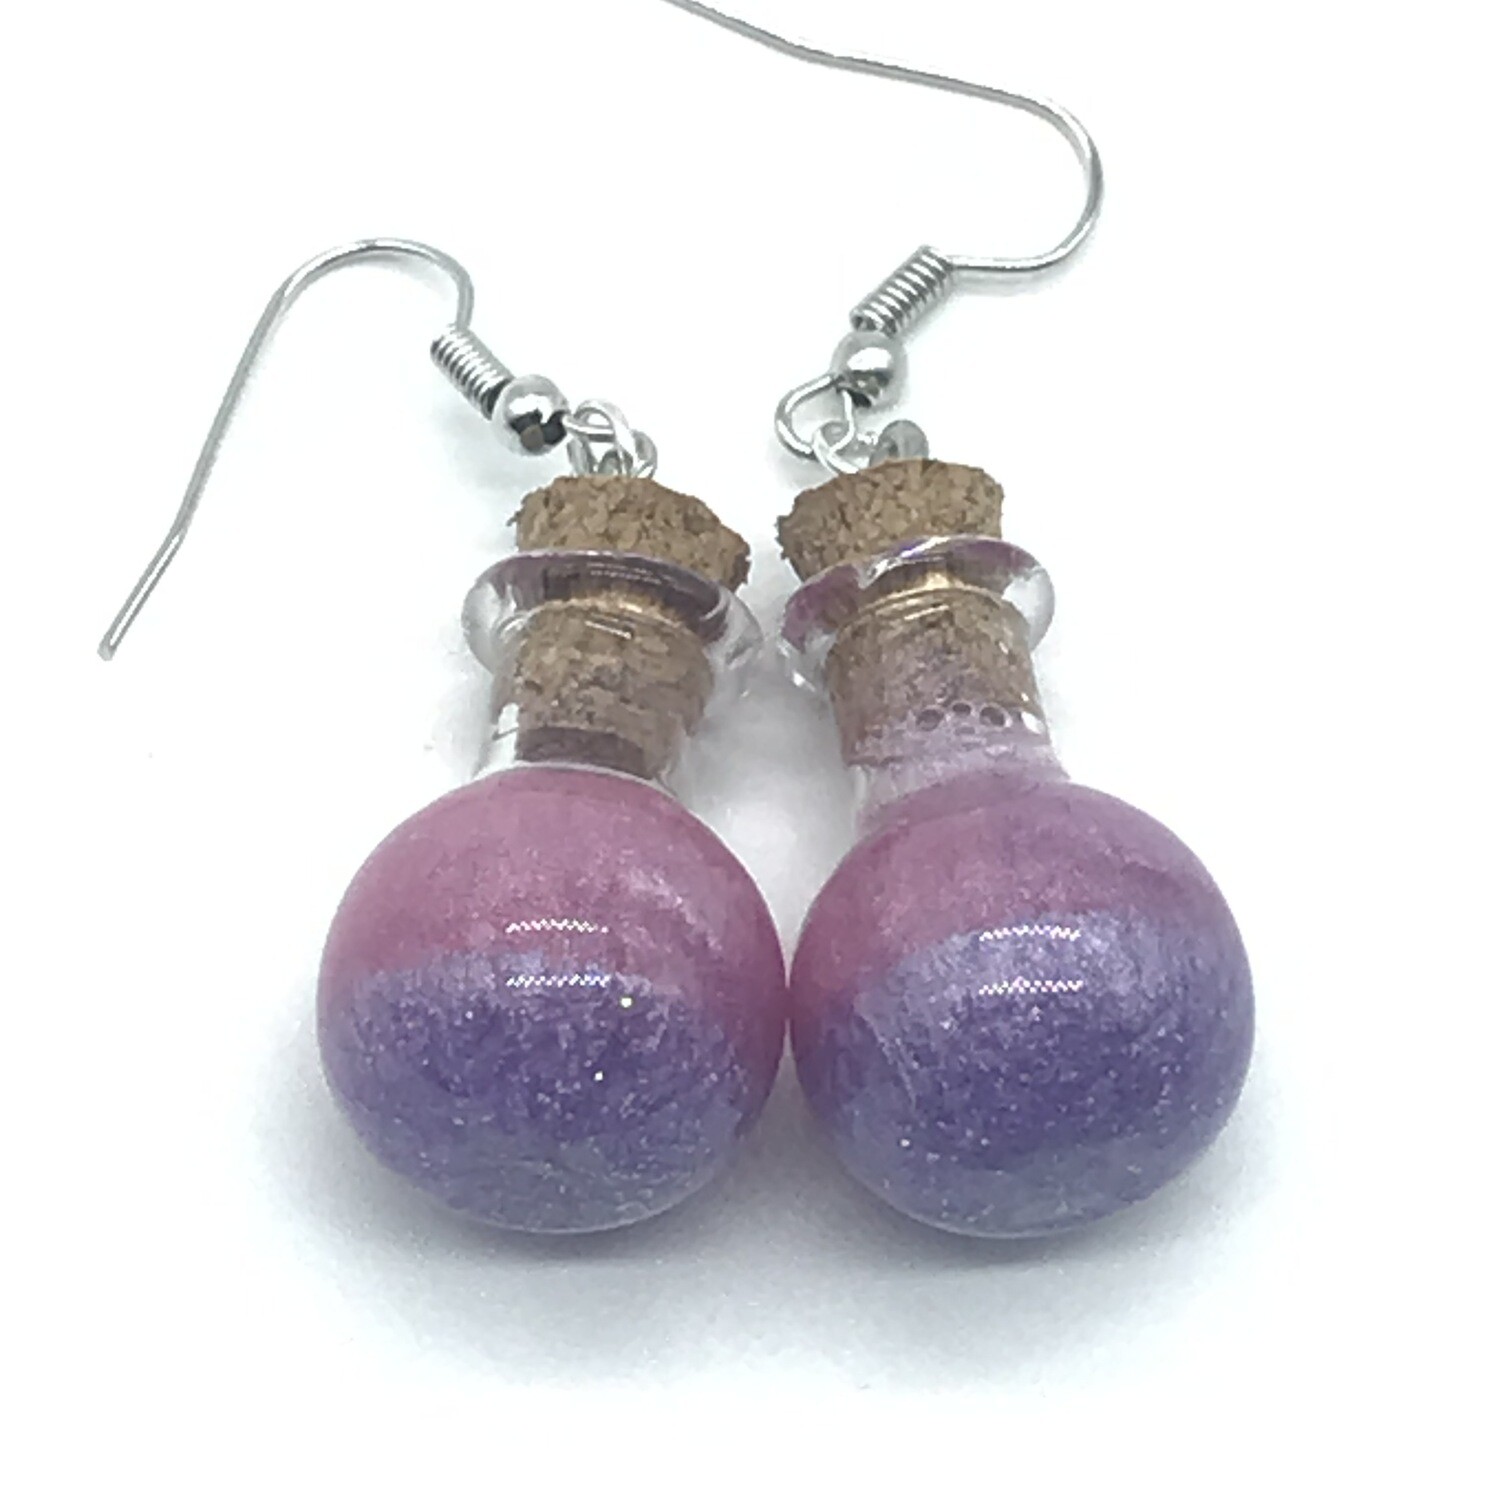 Potion Earrings - Lavender and pink, sphere bottle